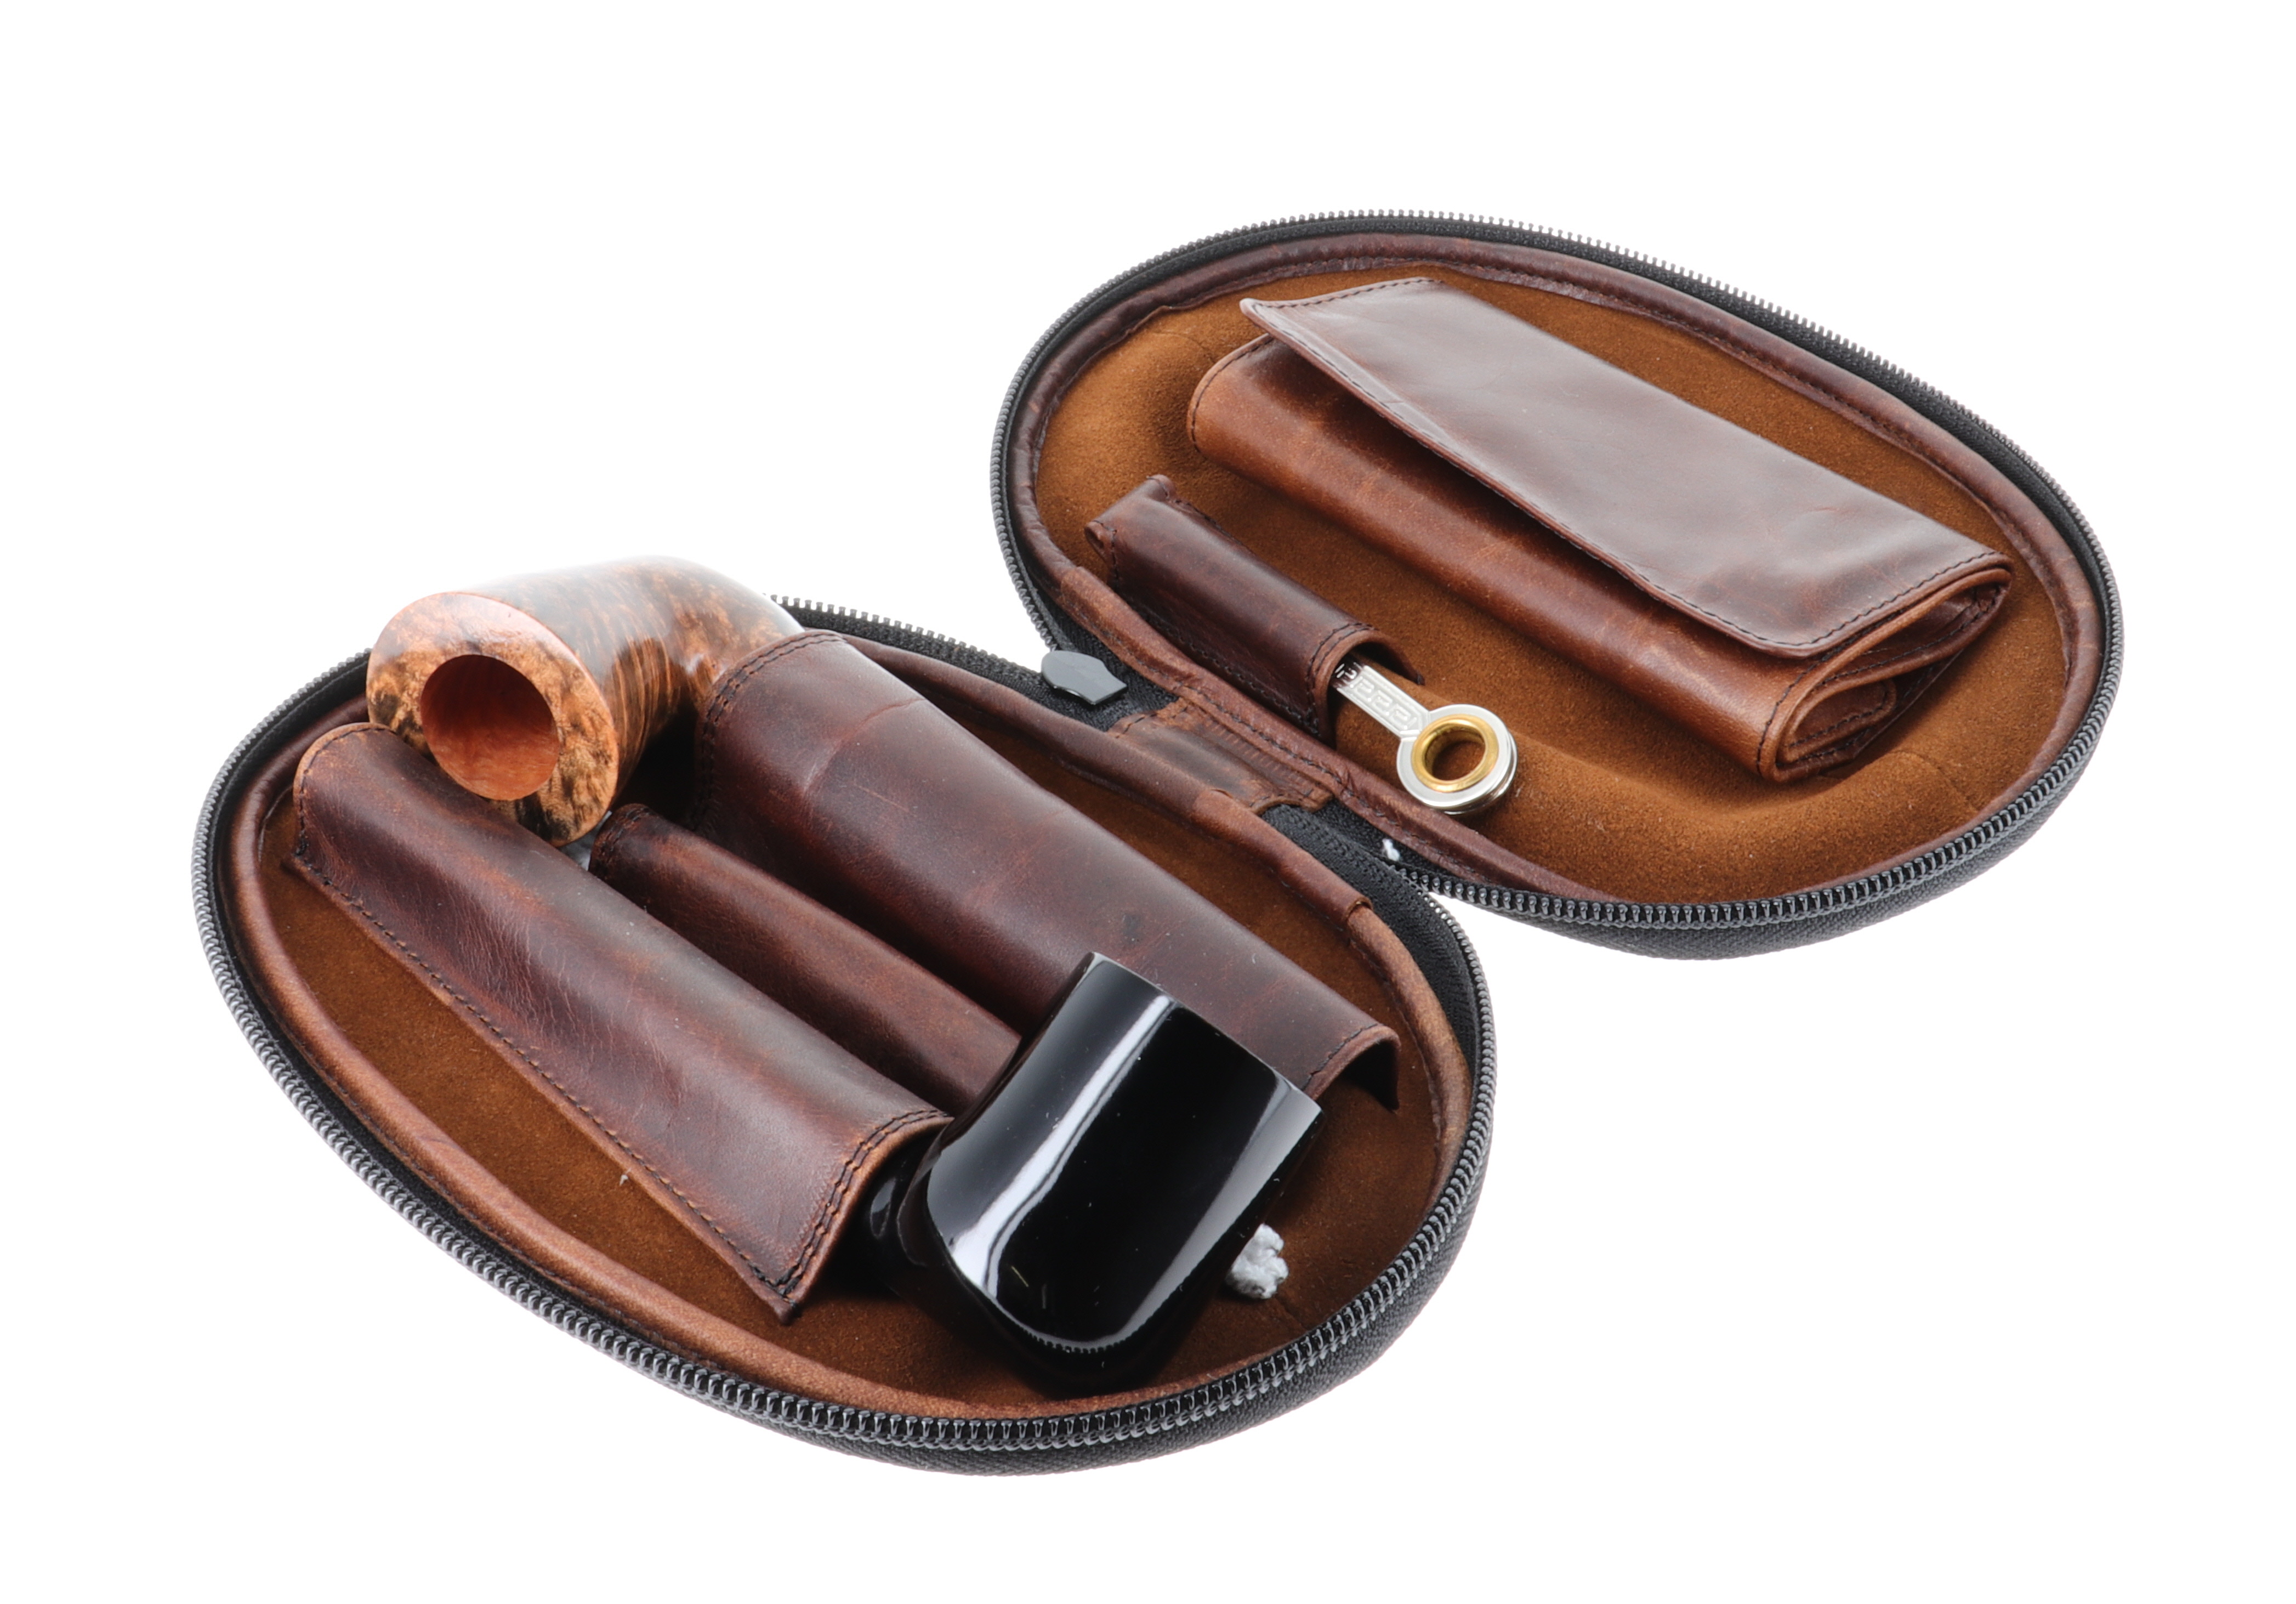 Fiamma di Re - Leather DARK Pouch 2 Pipes and Accessories Made in Italy